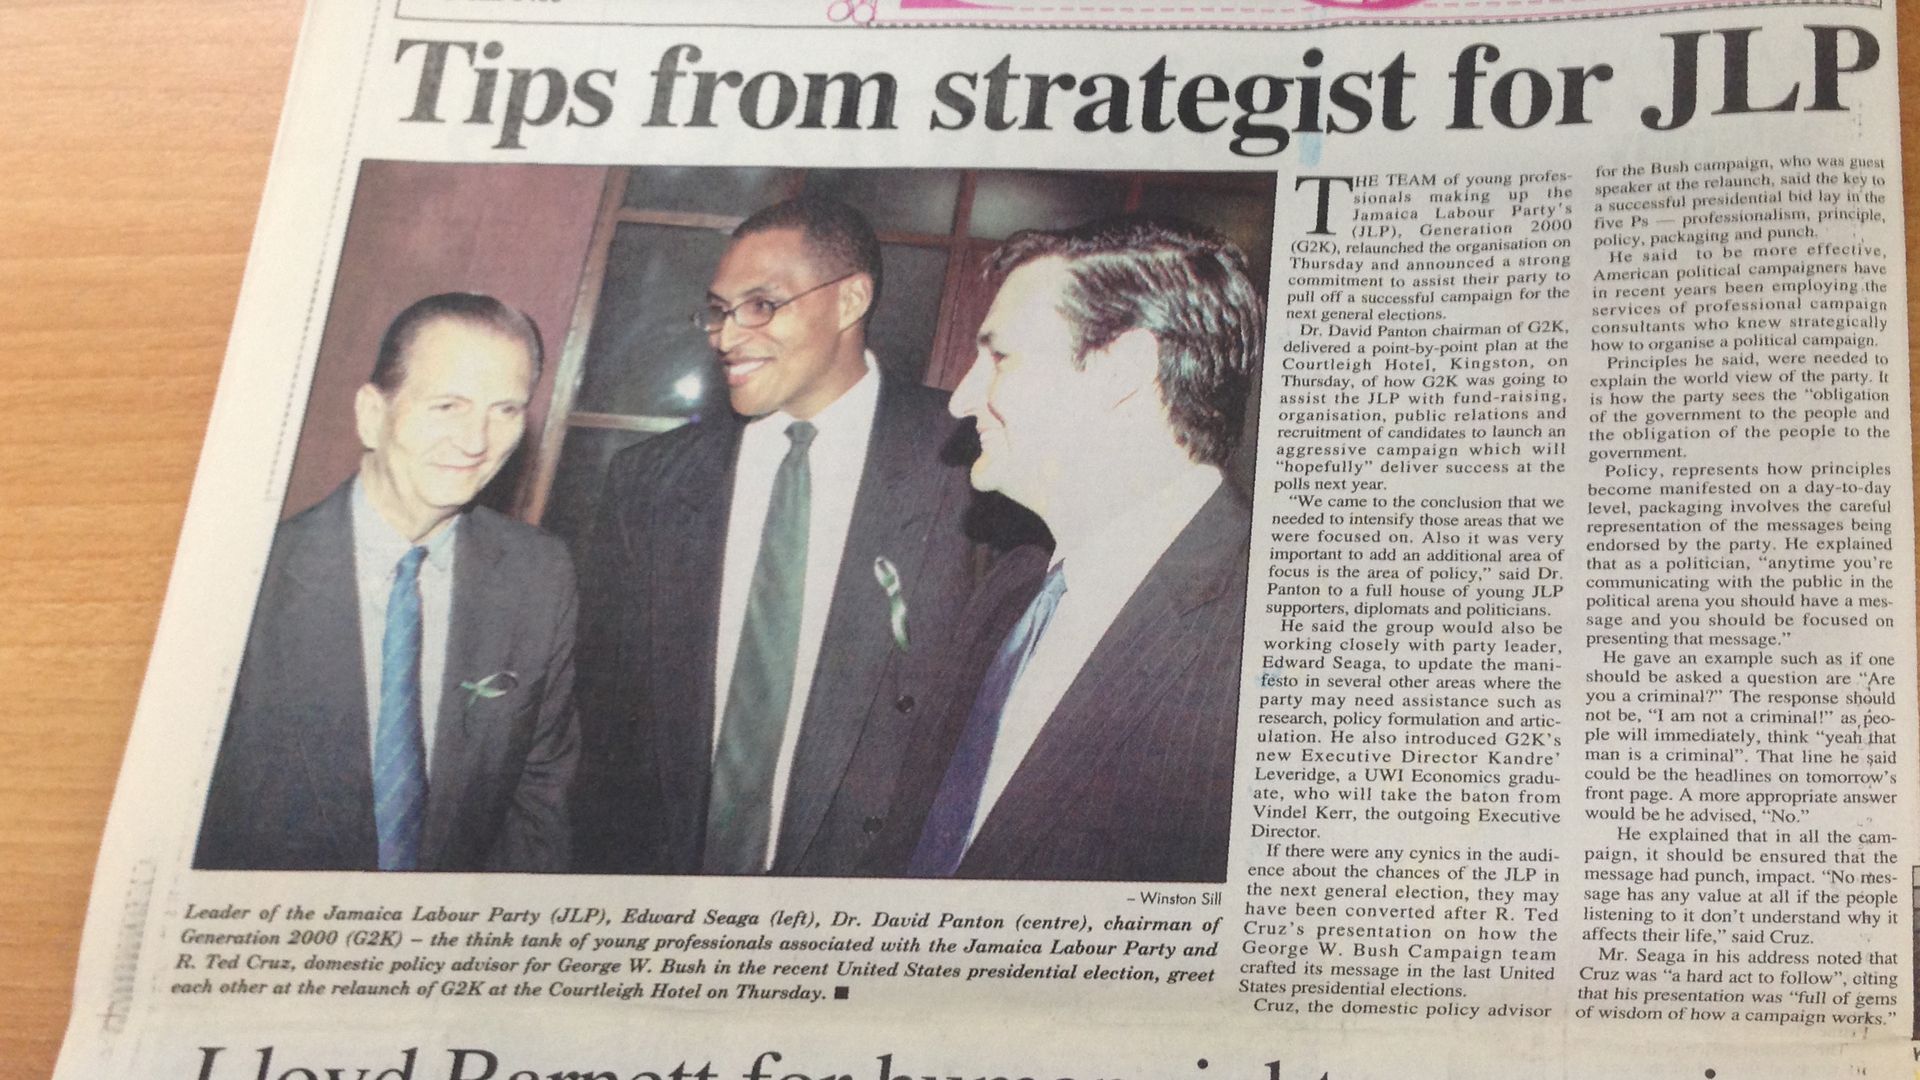 Sen. Ted Cruz is seen with his college roommate David Panton on the front page of a newspaper during a 2001 visit to Jamaica.